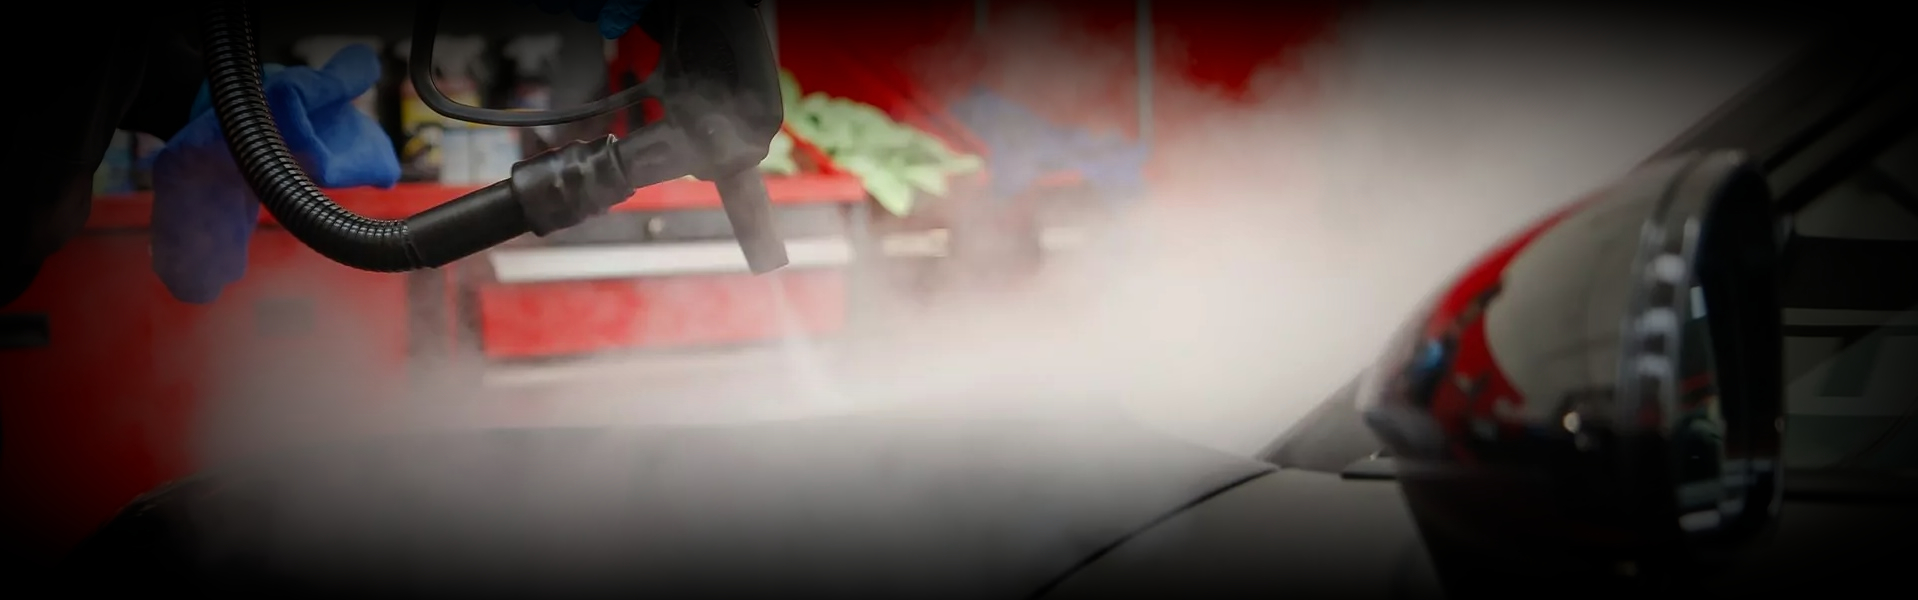 Steam car wash: the solution against water waste